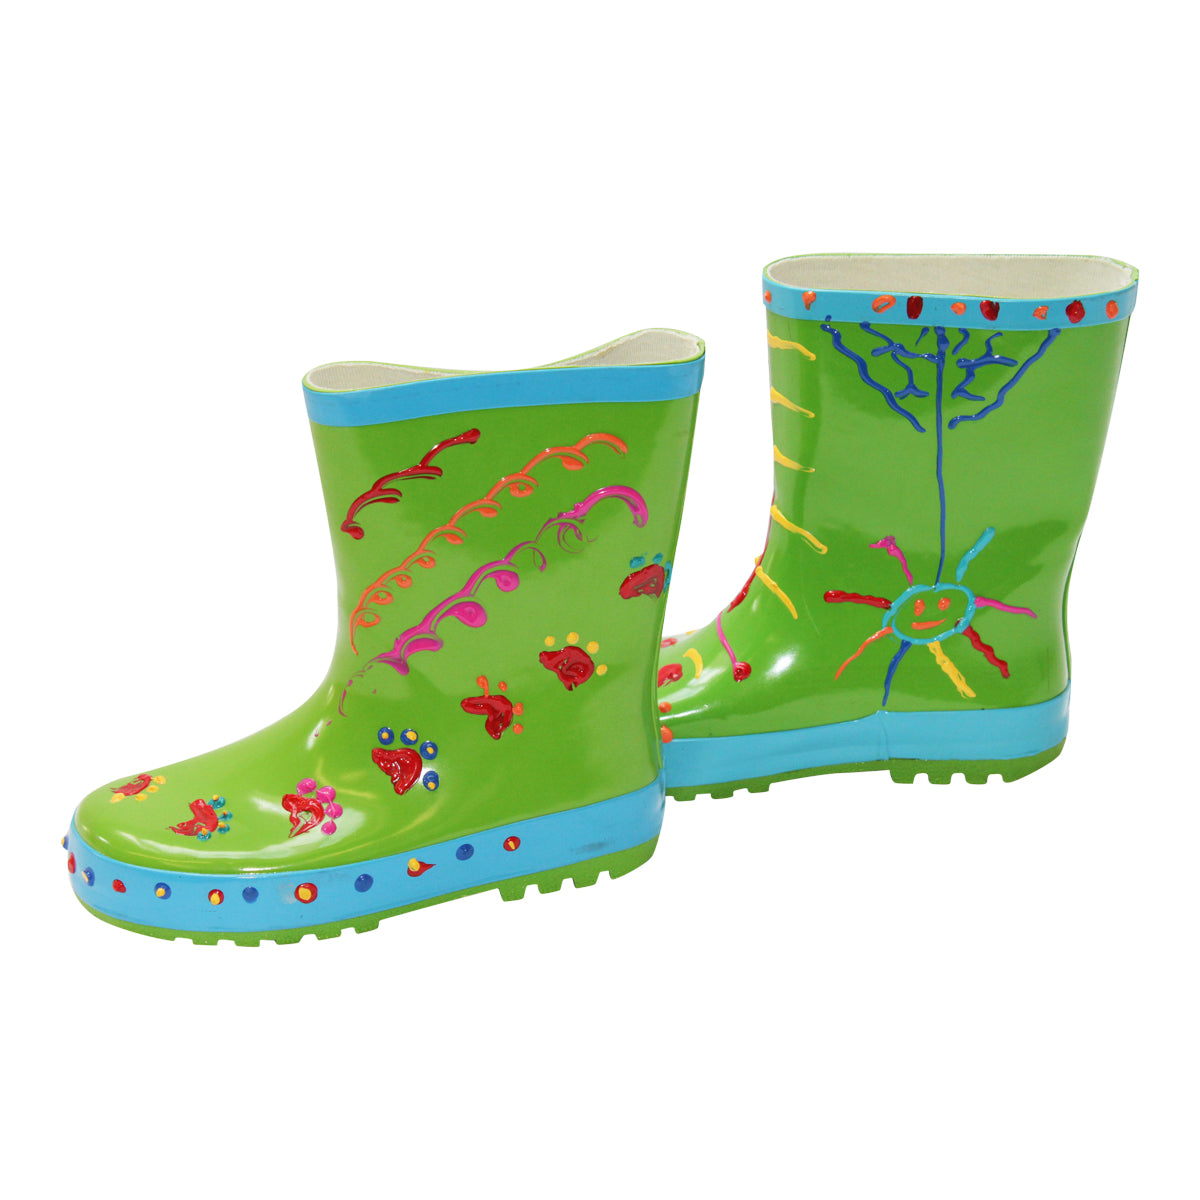 Little Pals Paint Your Own  Wellies Rain Boots Green with Blue Trim Kids US Size 9.5